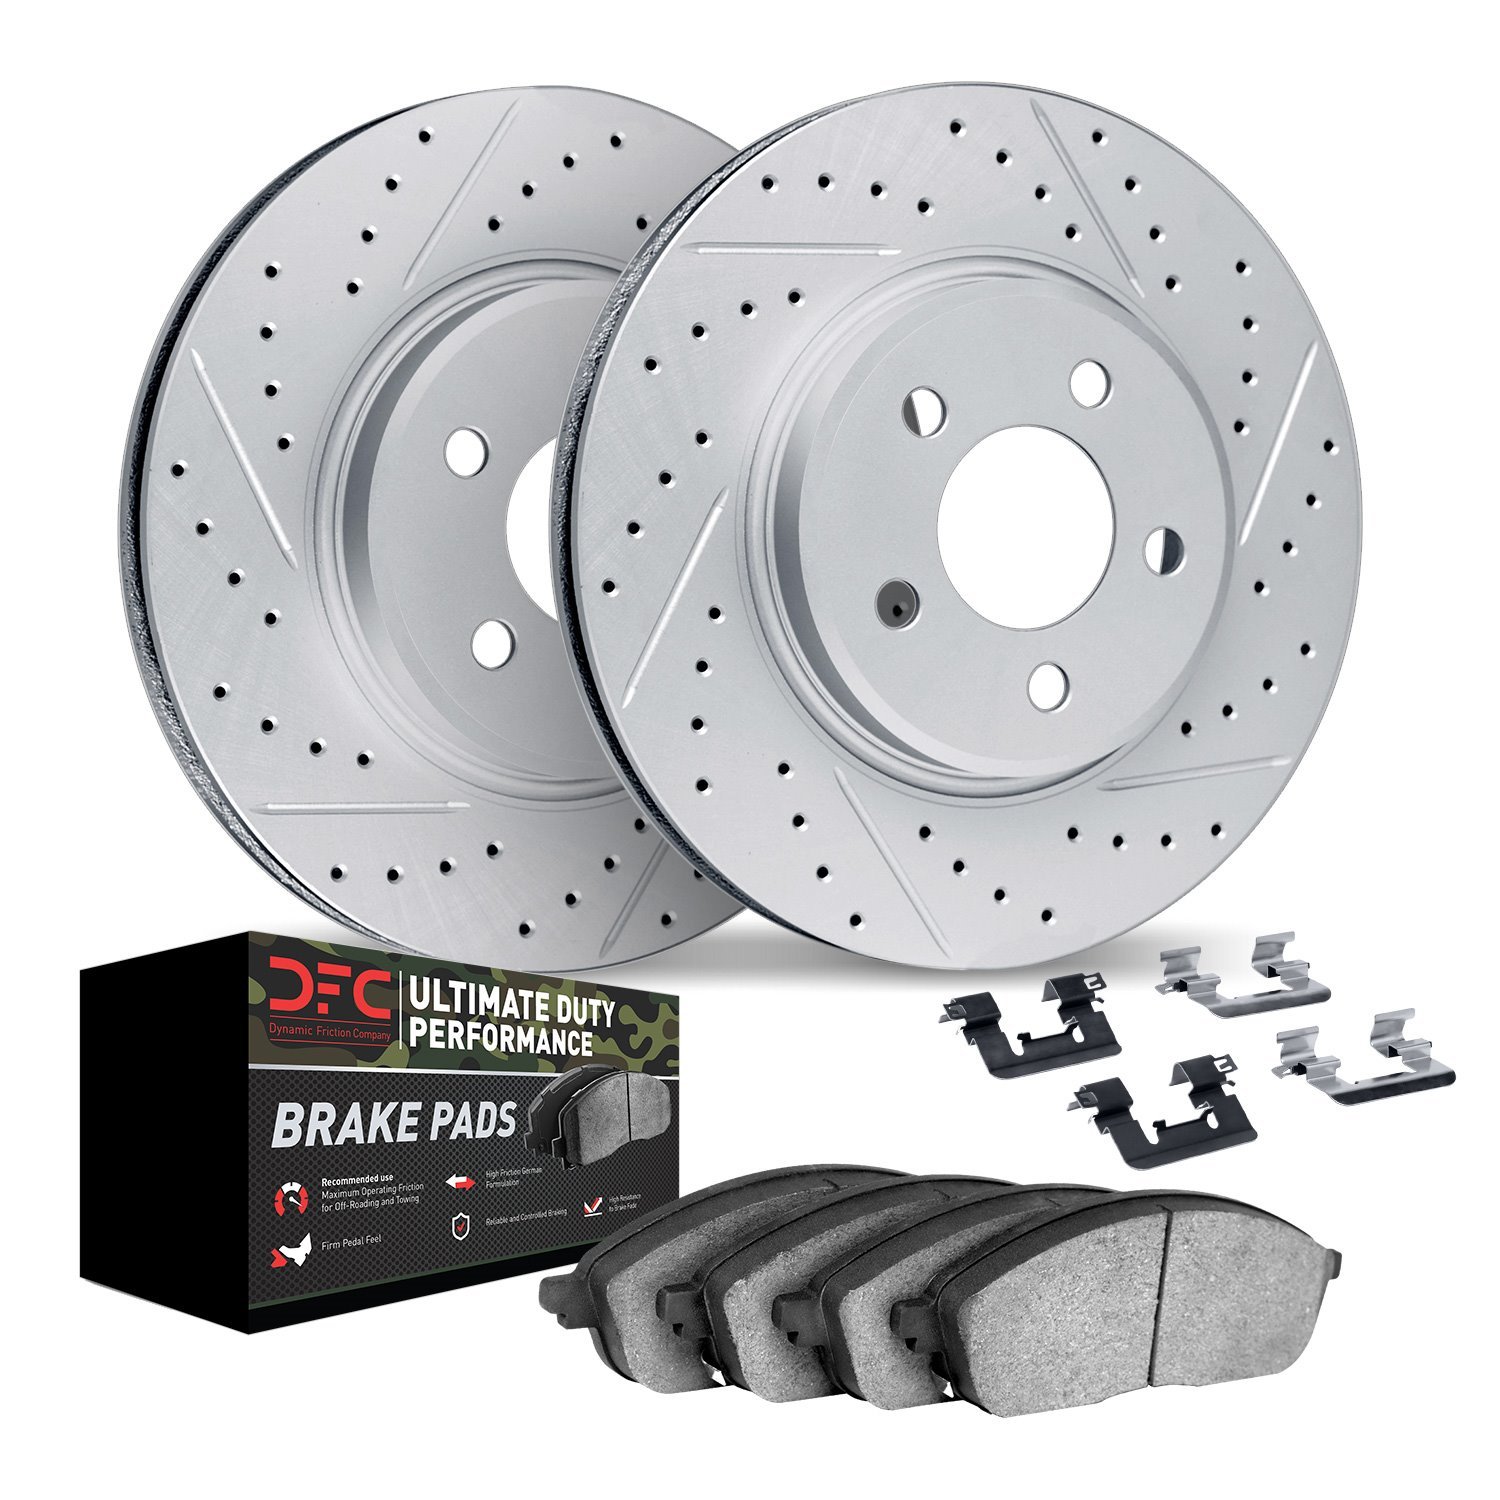 2412-48006 Geoperformance Drilled/Slotted Brake Rotors with Ultimate-Duty Brake Pads Kit & Hardware, 1990-2002 GM, Position: Fro